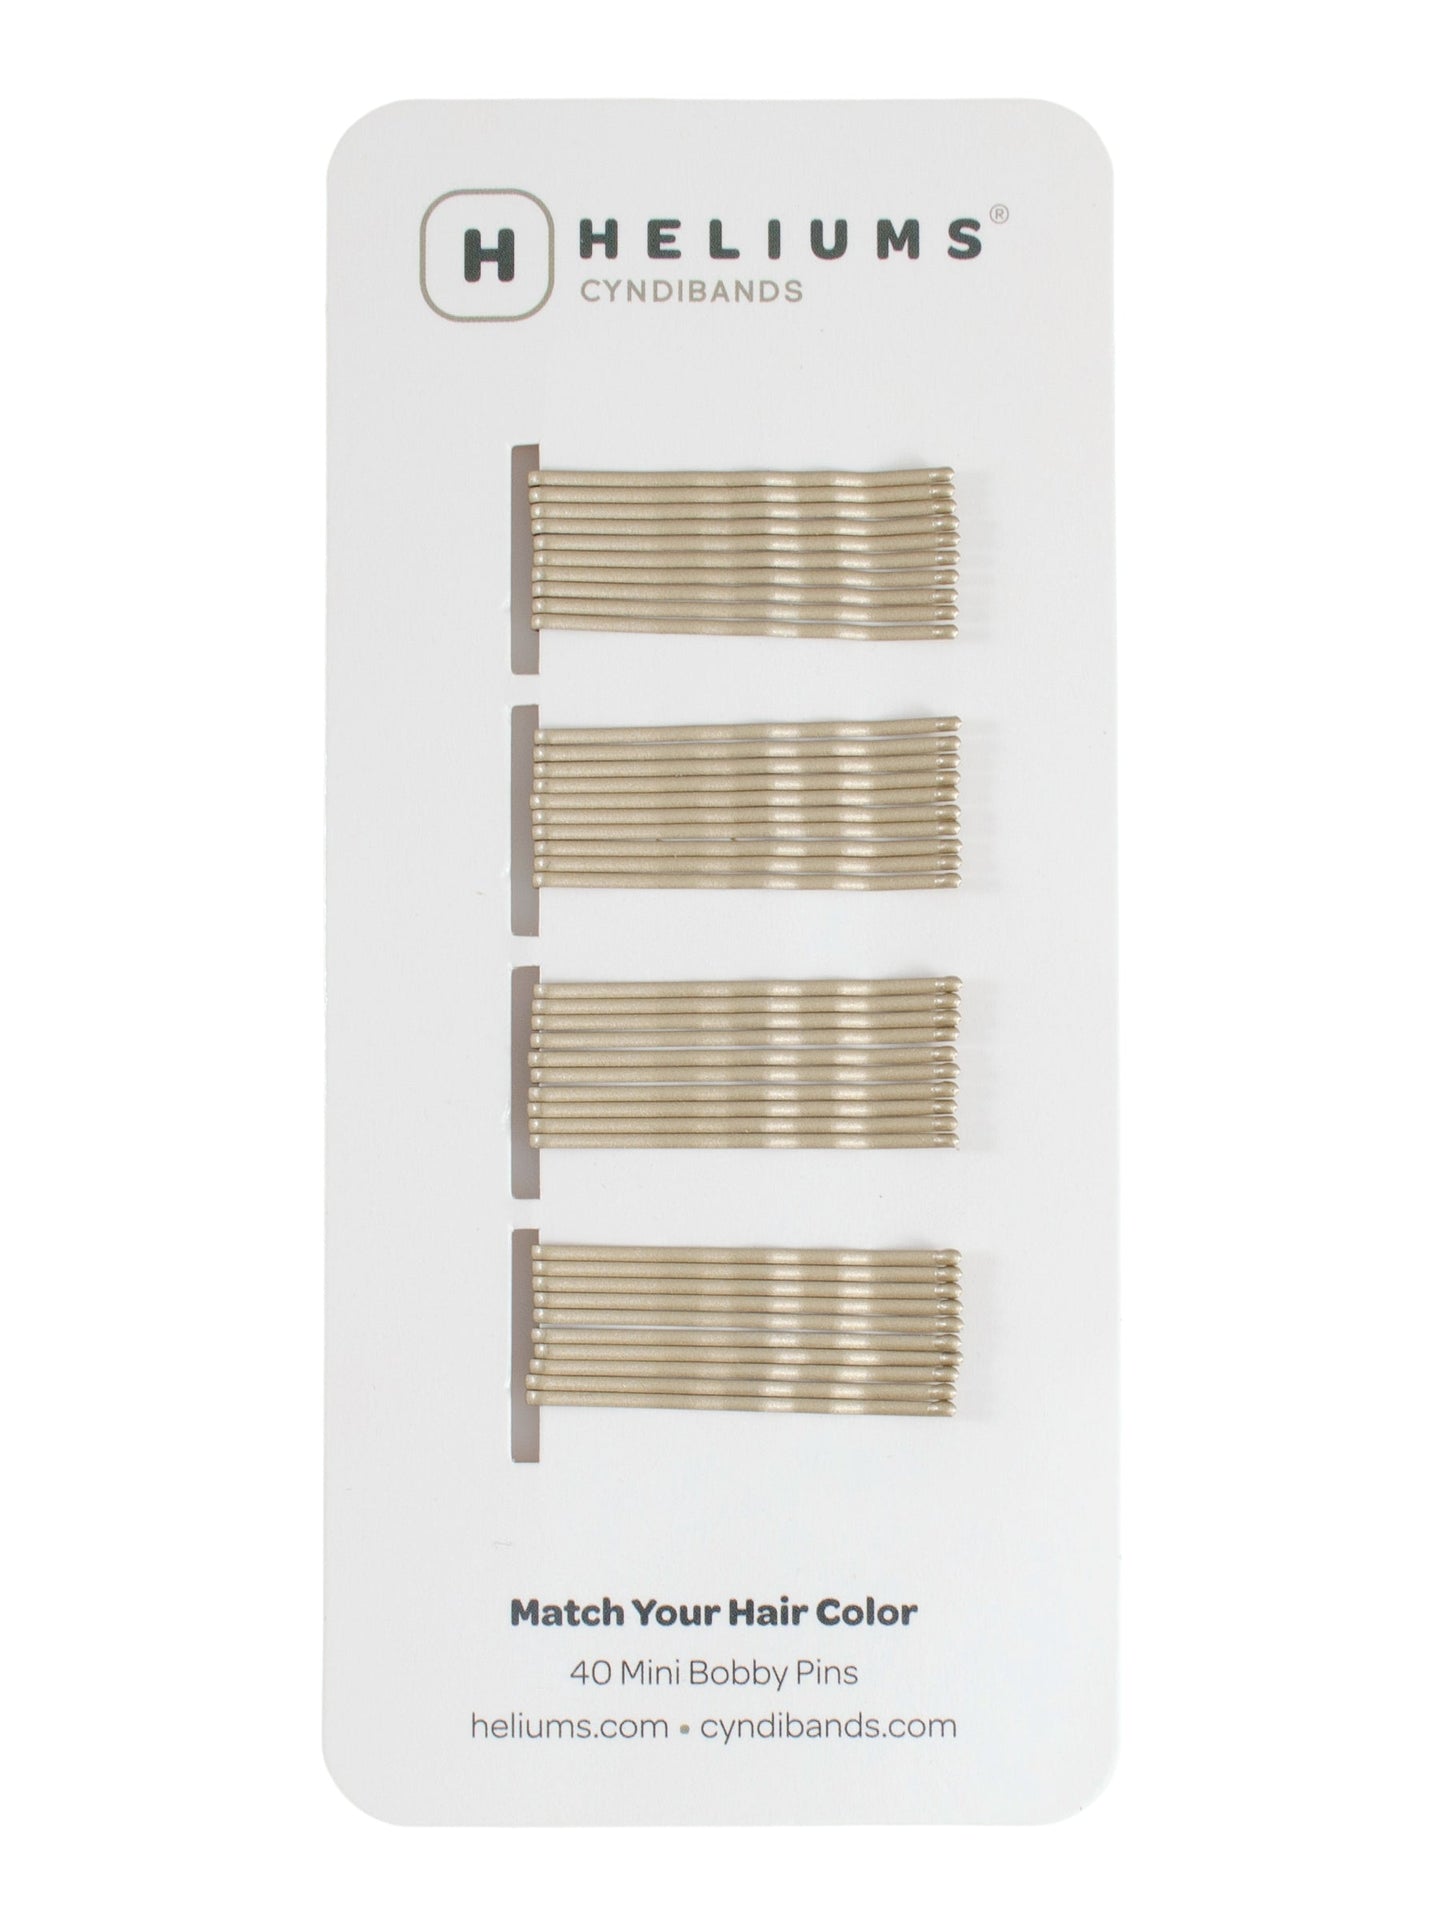 Heliums Mini Bobby Pins - 40 Pack, 1.5 Inch Small Hair Pins - Light Ash Blonde